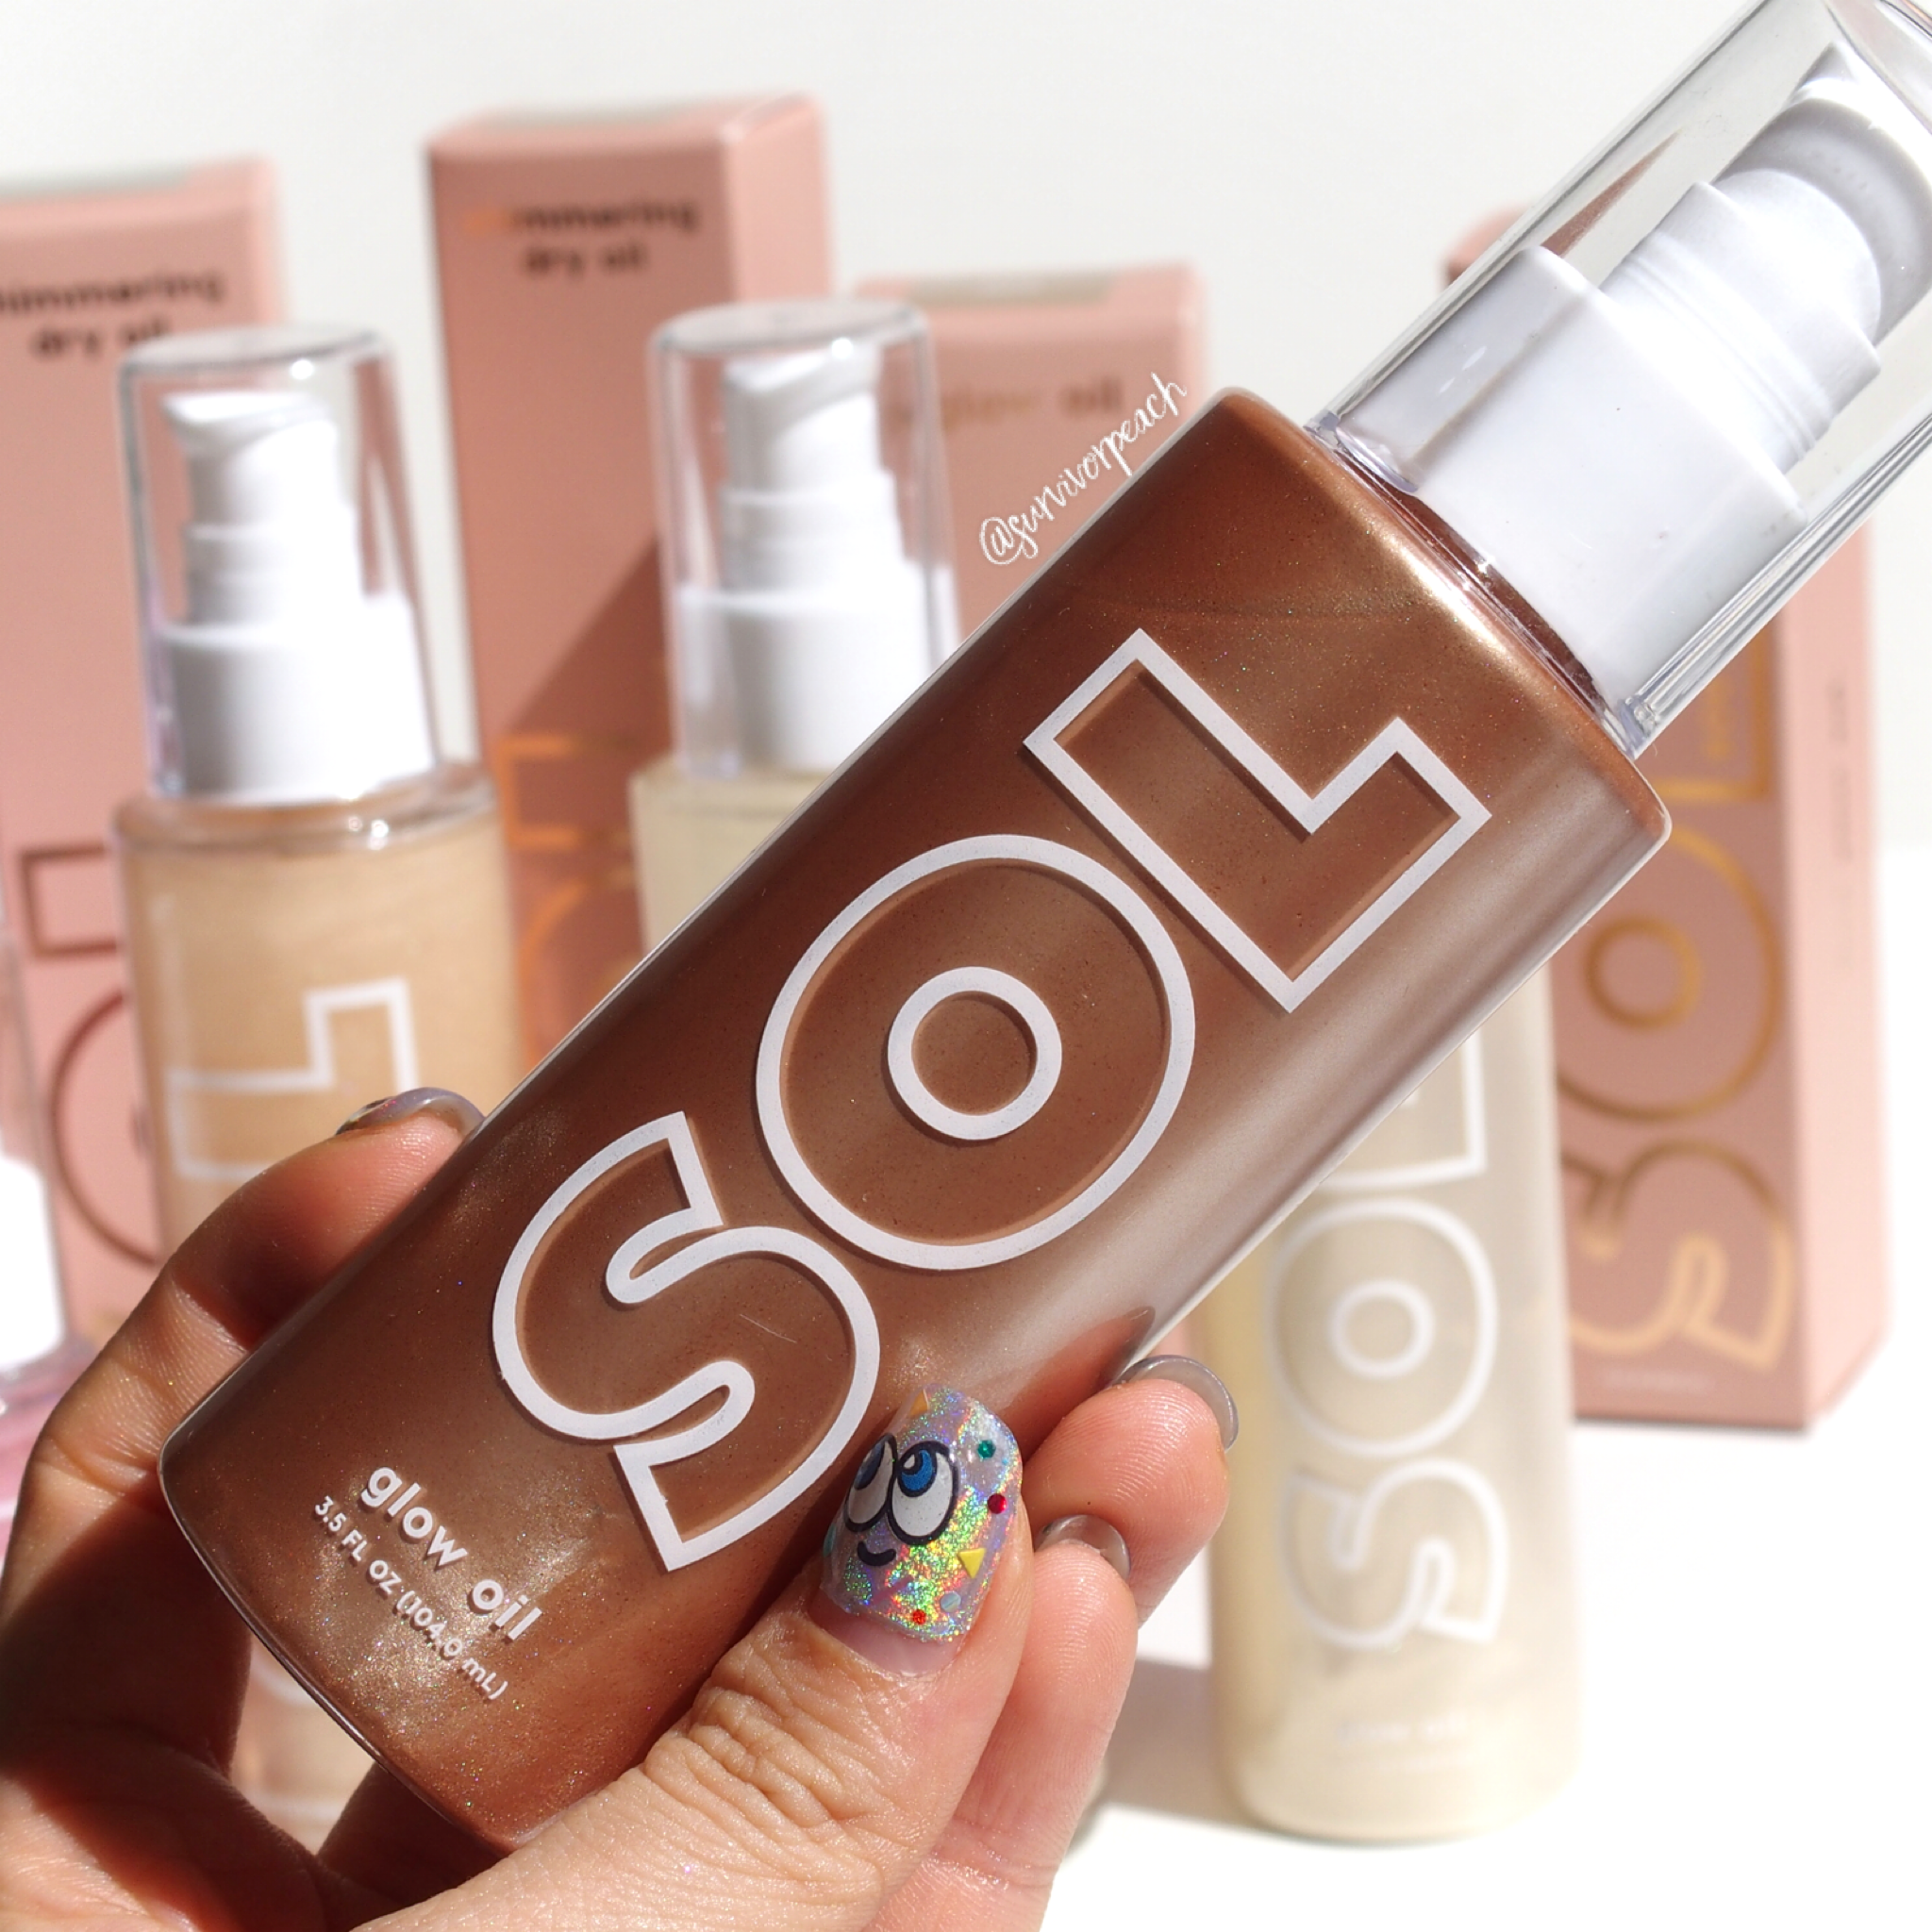 Sol body glow oil & shimmering dry oil Review and Swatches — Survivorpeach